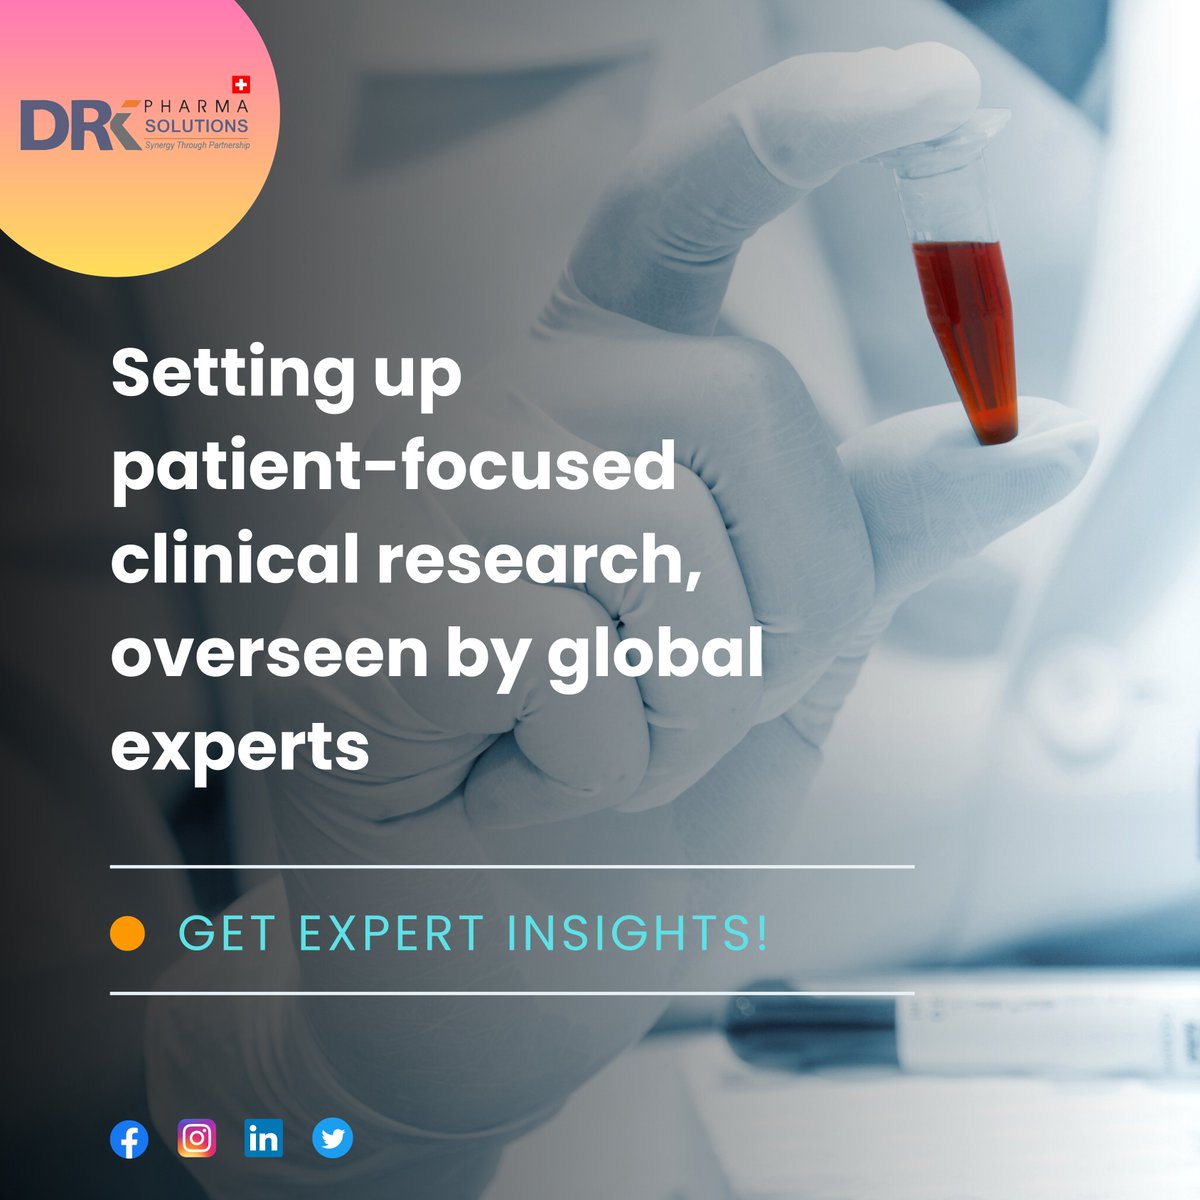 Revolutionize your clinical research experience!

#DRKpharmasolutionsGmbH #PatientFocused #GlobalExpertise #ClinicalResearchInsights  #healthcare #USA #europe #uk #middleeast #medicalresearch #clinicaltrial #cdmo #cro #science #clinical #health #clinicalstudies #pharma